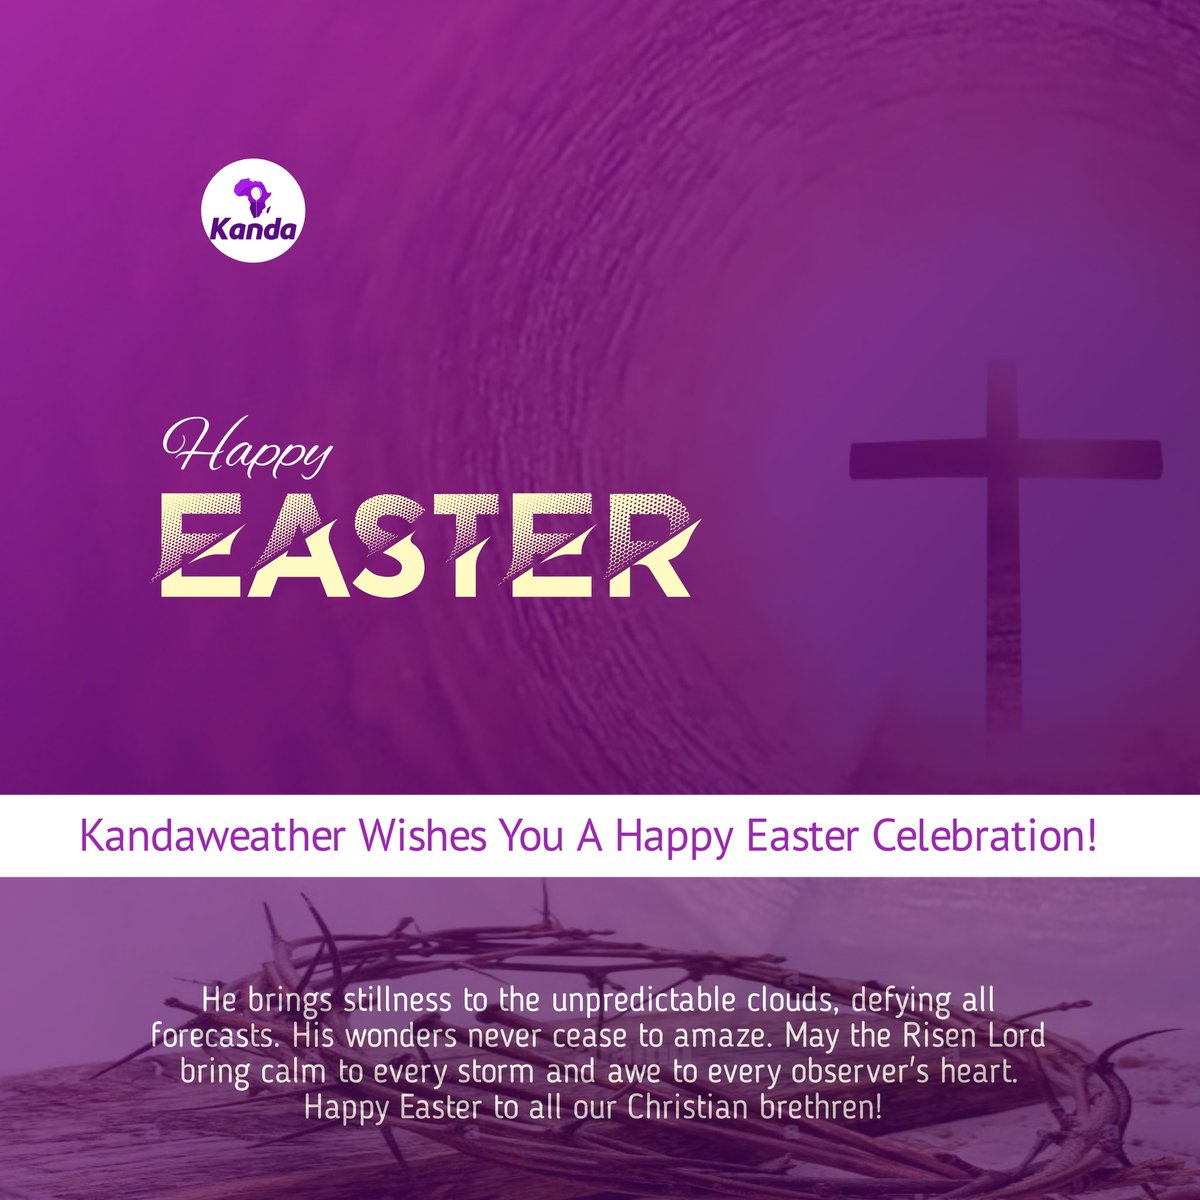 He brings stillness to the unpredictable clouds, defying all forecasts. His wonders never cease to amaze. May the Risen Lord bring calm to every storm and awe to every observer's heart. Happy Easter to all our Christian brethren! 🌨️☁️✨ #EasterSunday #KandaWeather #Easter